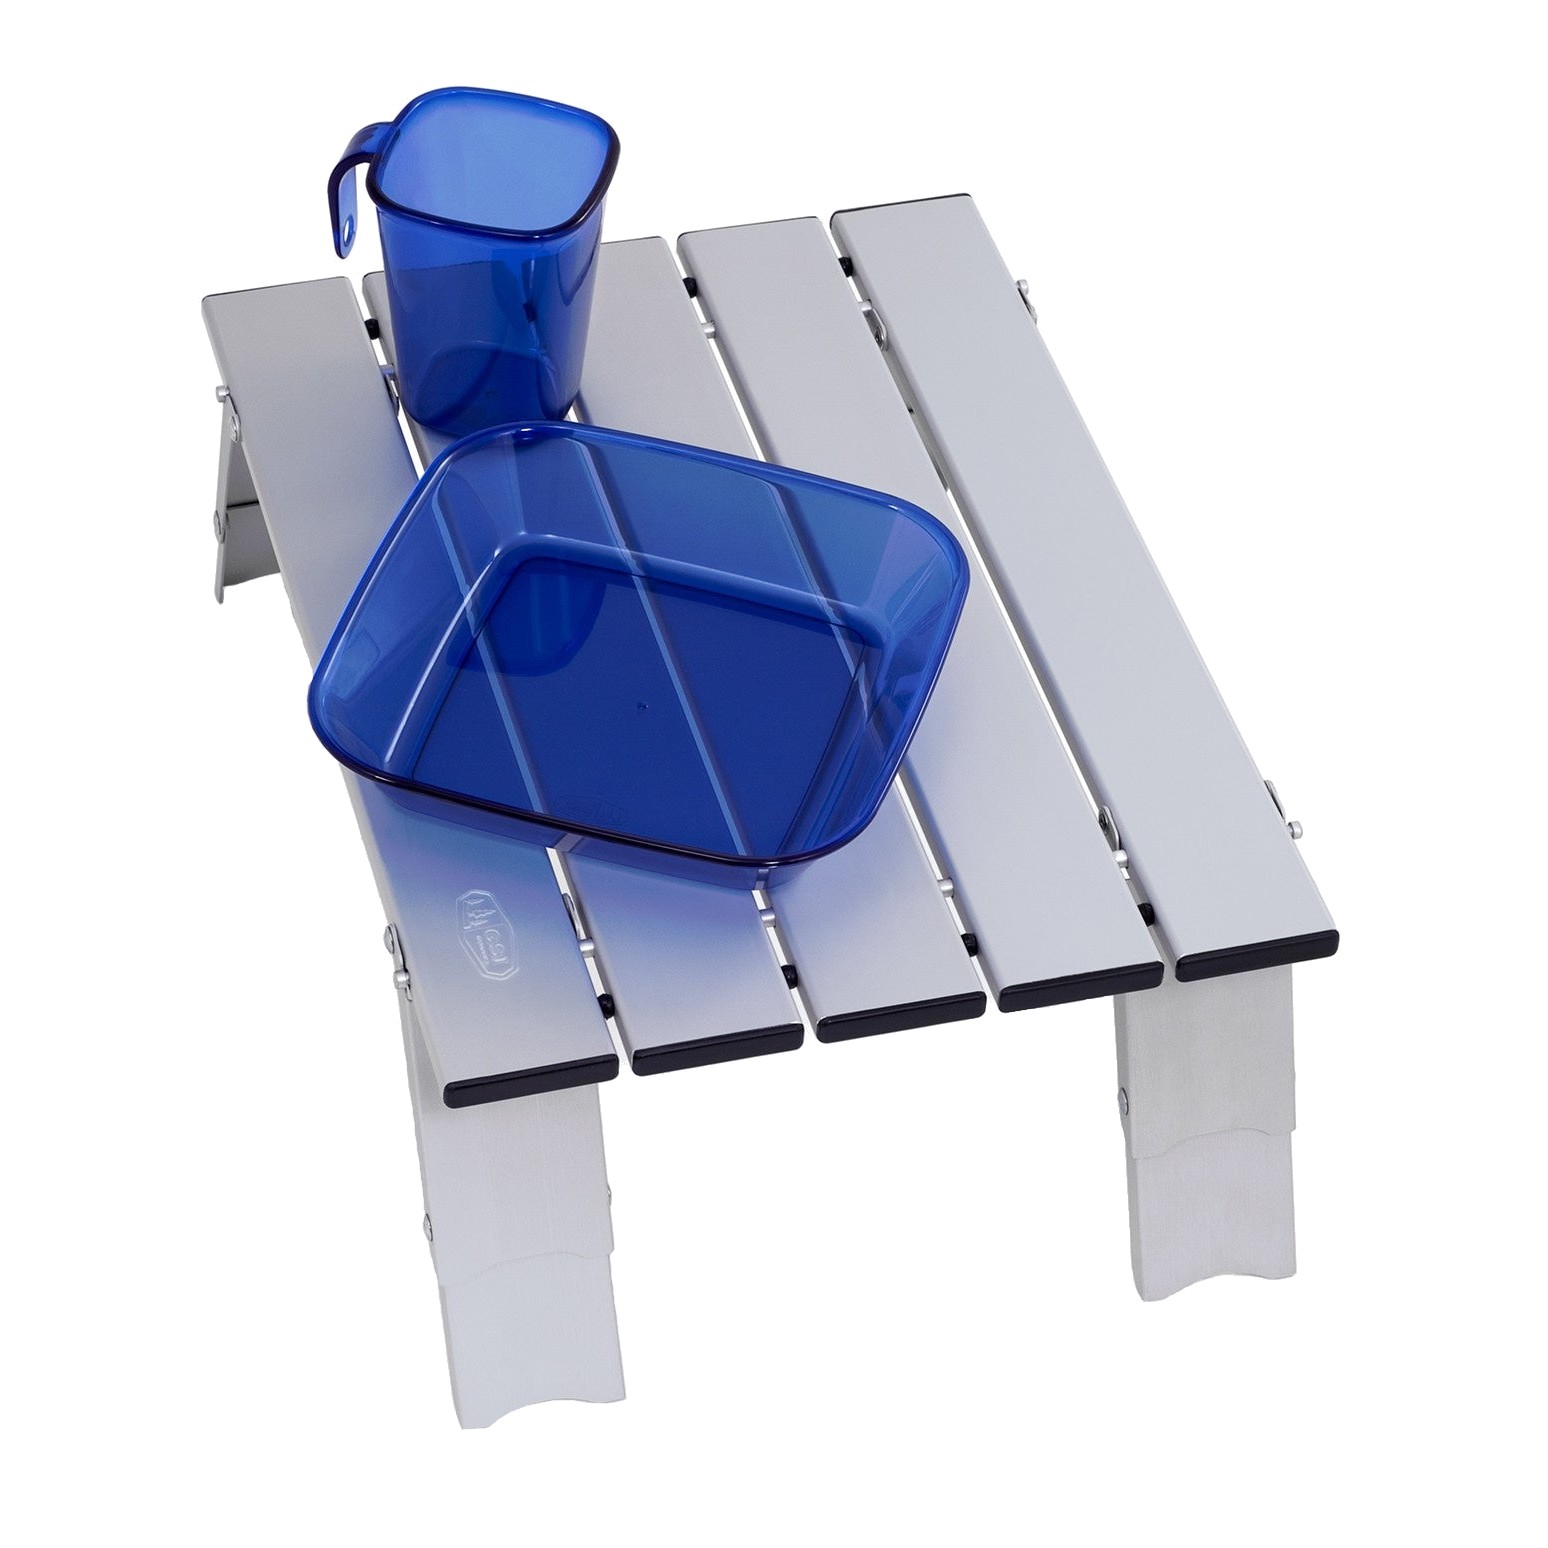 GSI Outdoors Micro Table + Lightweight Camping Table